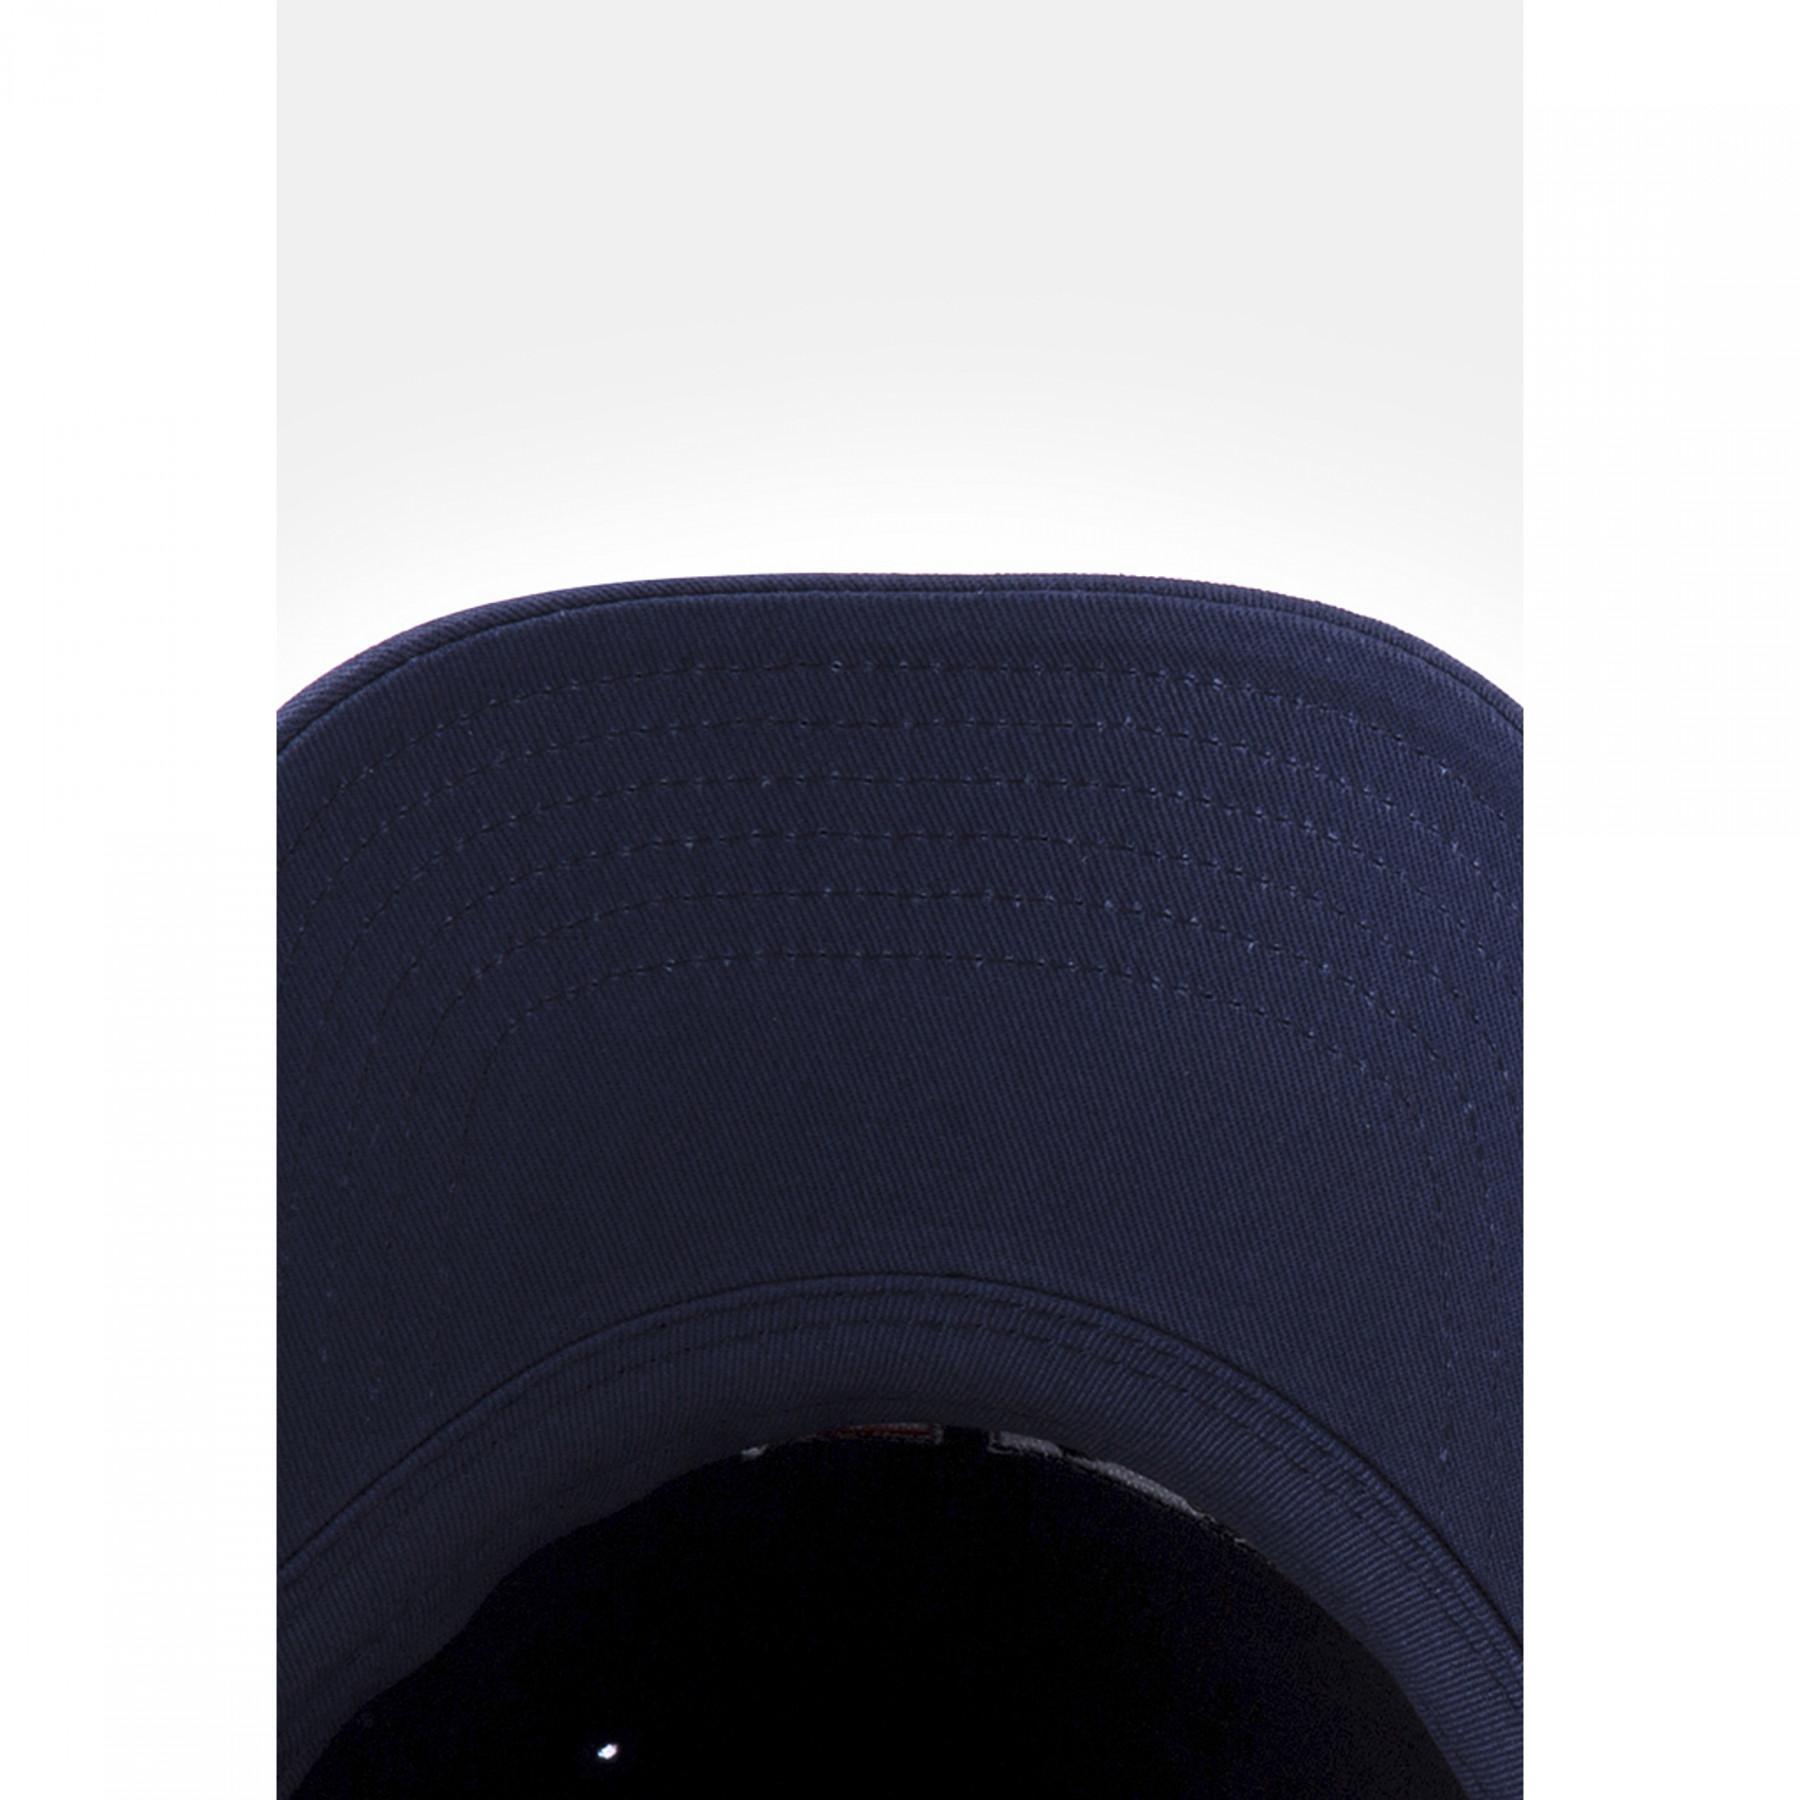 Casquette Cayler&Sons 9664 curved